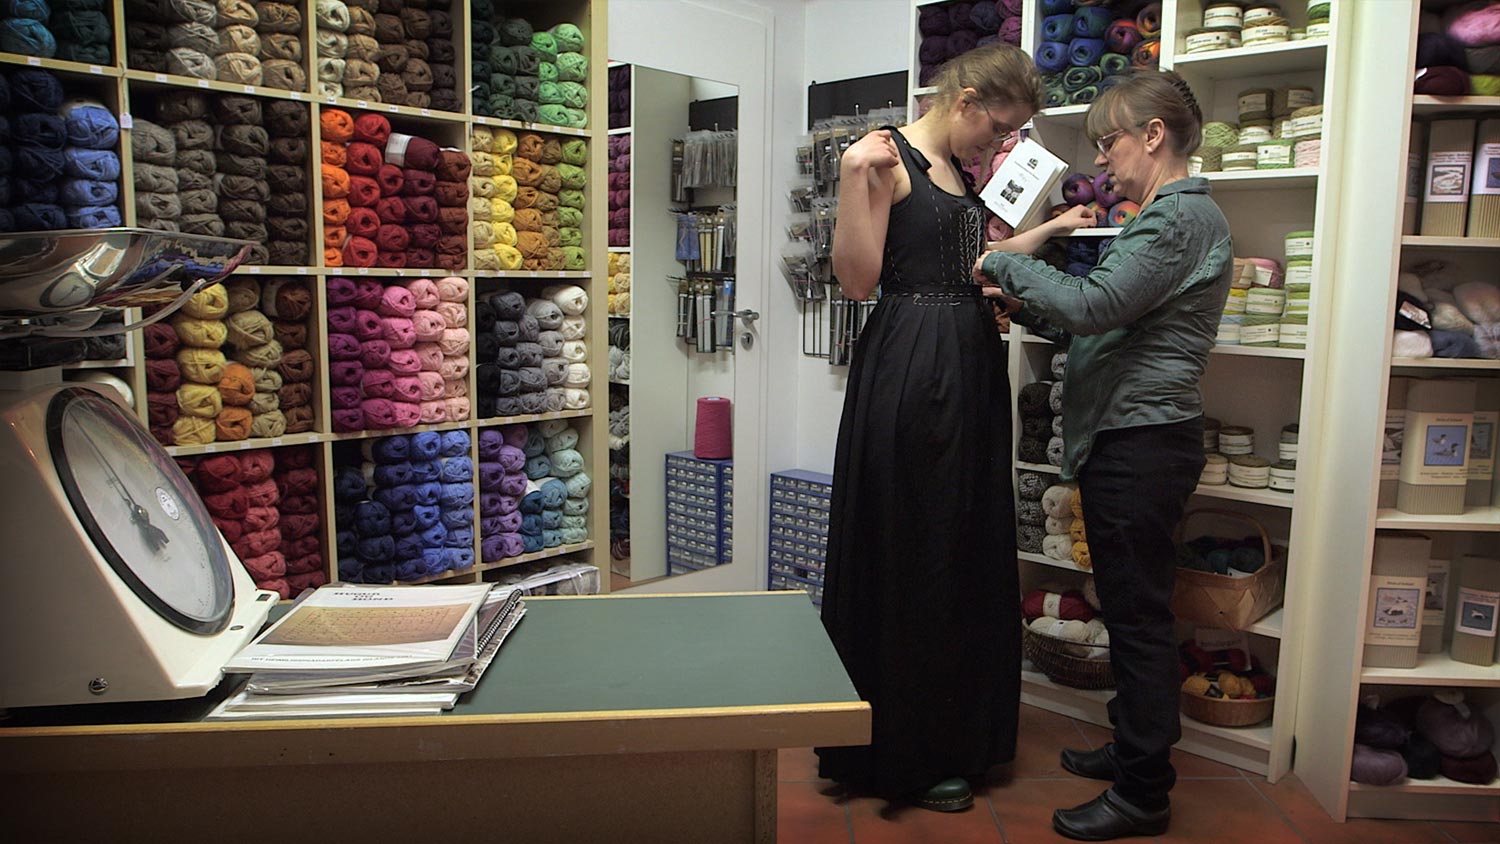 A young woman trying on the dress she is sewing with the help of an older woman, her coach. They are surrounded by shelves stacked with yarn of many colors.